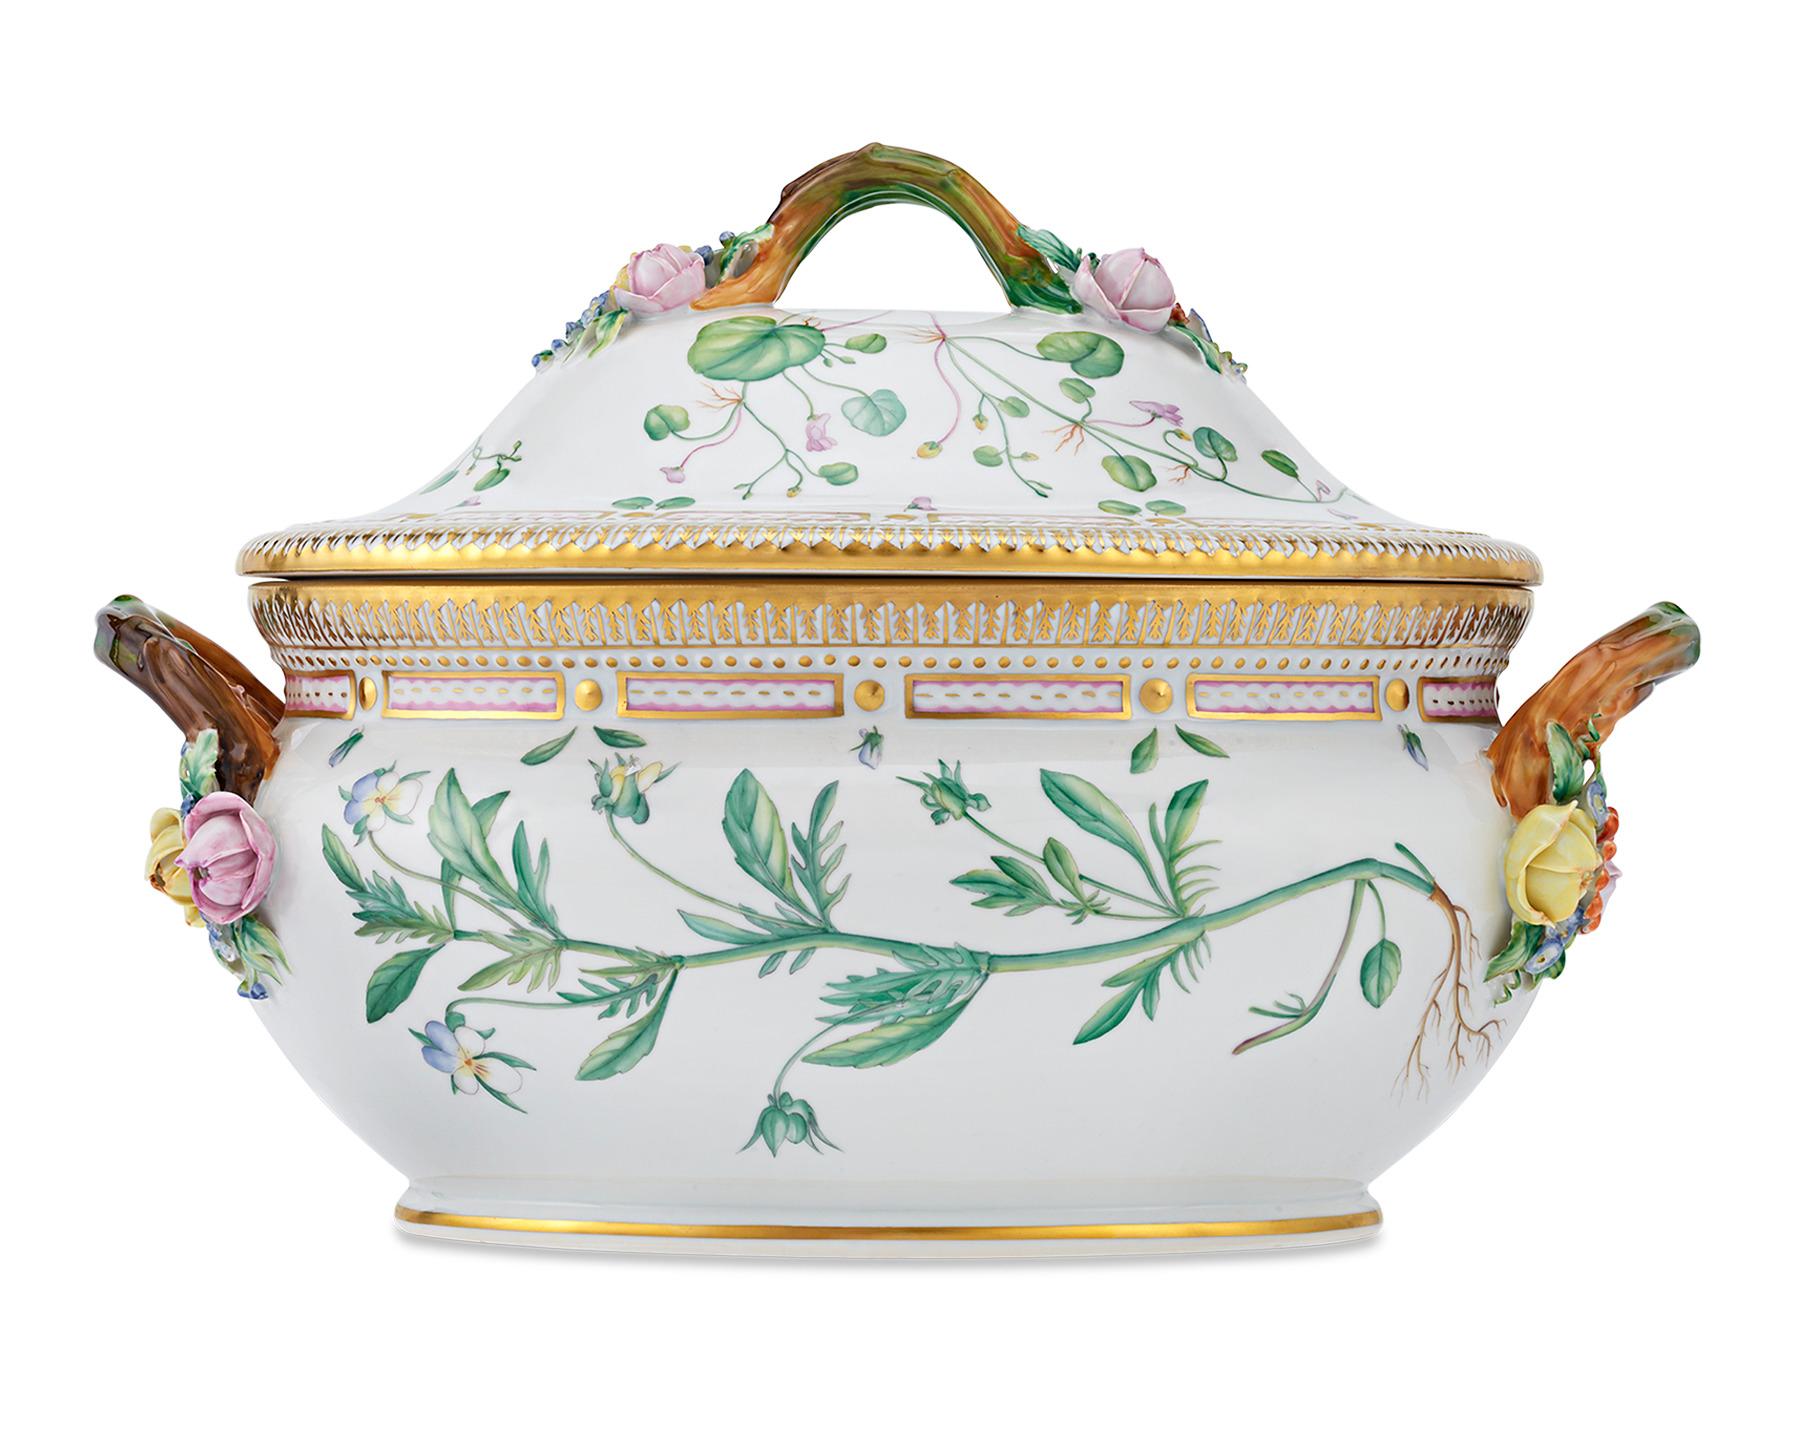 This quintessential Flora Danica soup tureen features a motif of rich, hand painted botanical illustrations taken directly from the collection's namesake Danish atlas of botany. Royal Copenhagen porcelain is crafted with meticulous skill and